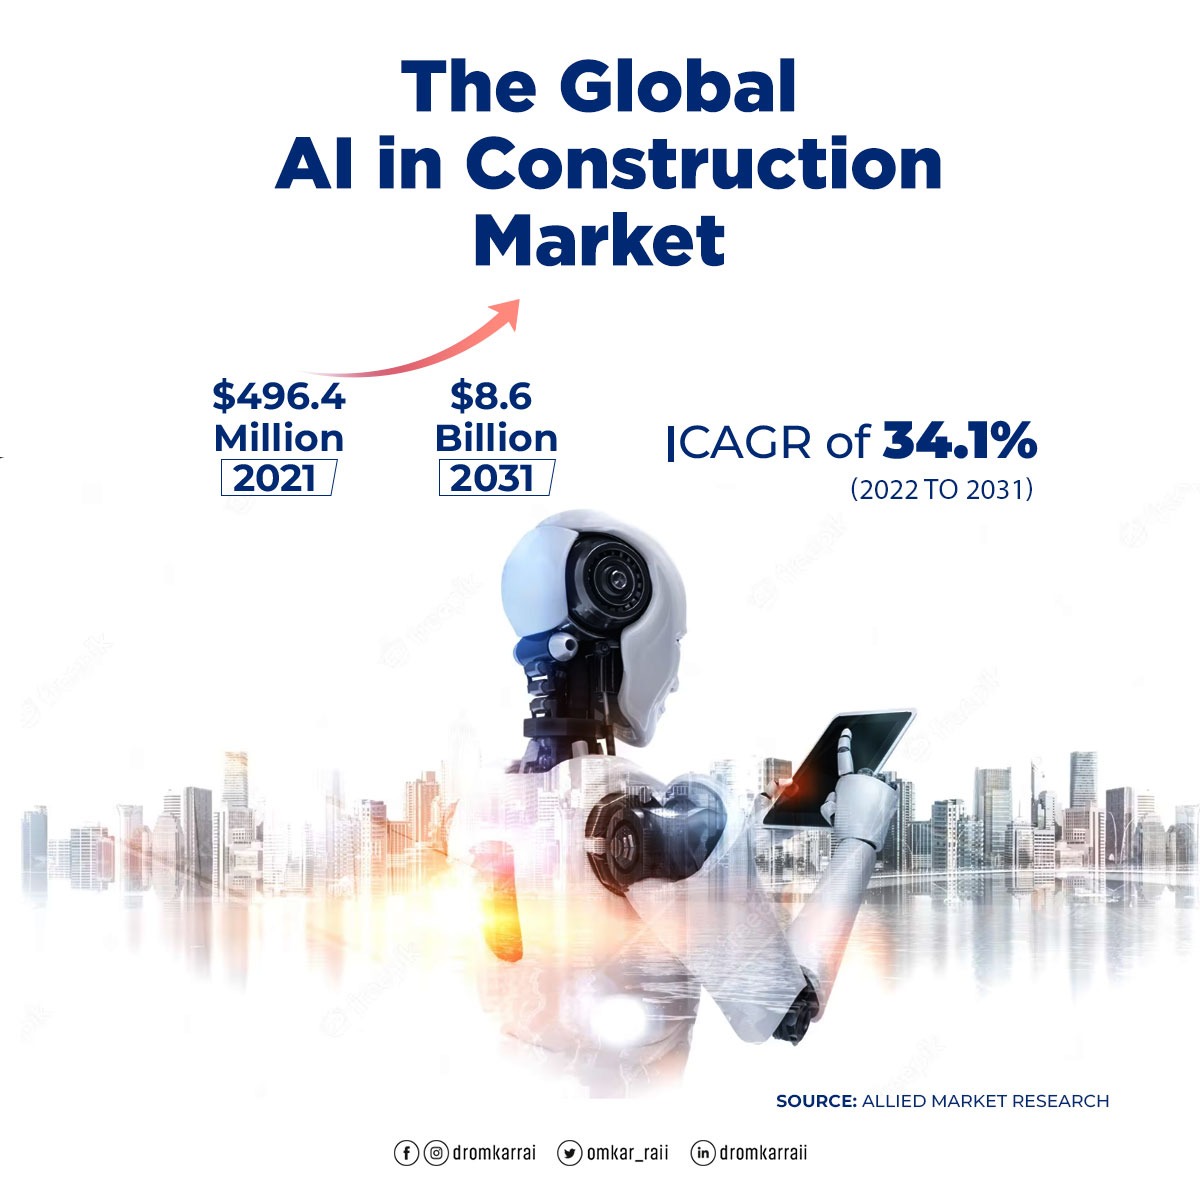 #MarketGrowth

The #ArtificialIntelligence is bringing a revolutionary change in every sector & with the development of technology its use will increase enormously in Construction
#AIinConstruction #BuildingTheFutureWithAI
#SmartConstruction #ConstructionTech #DigitalConstruction